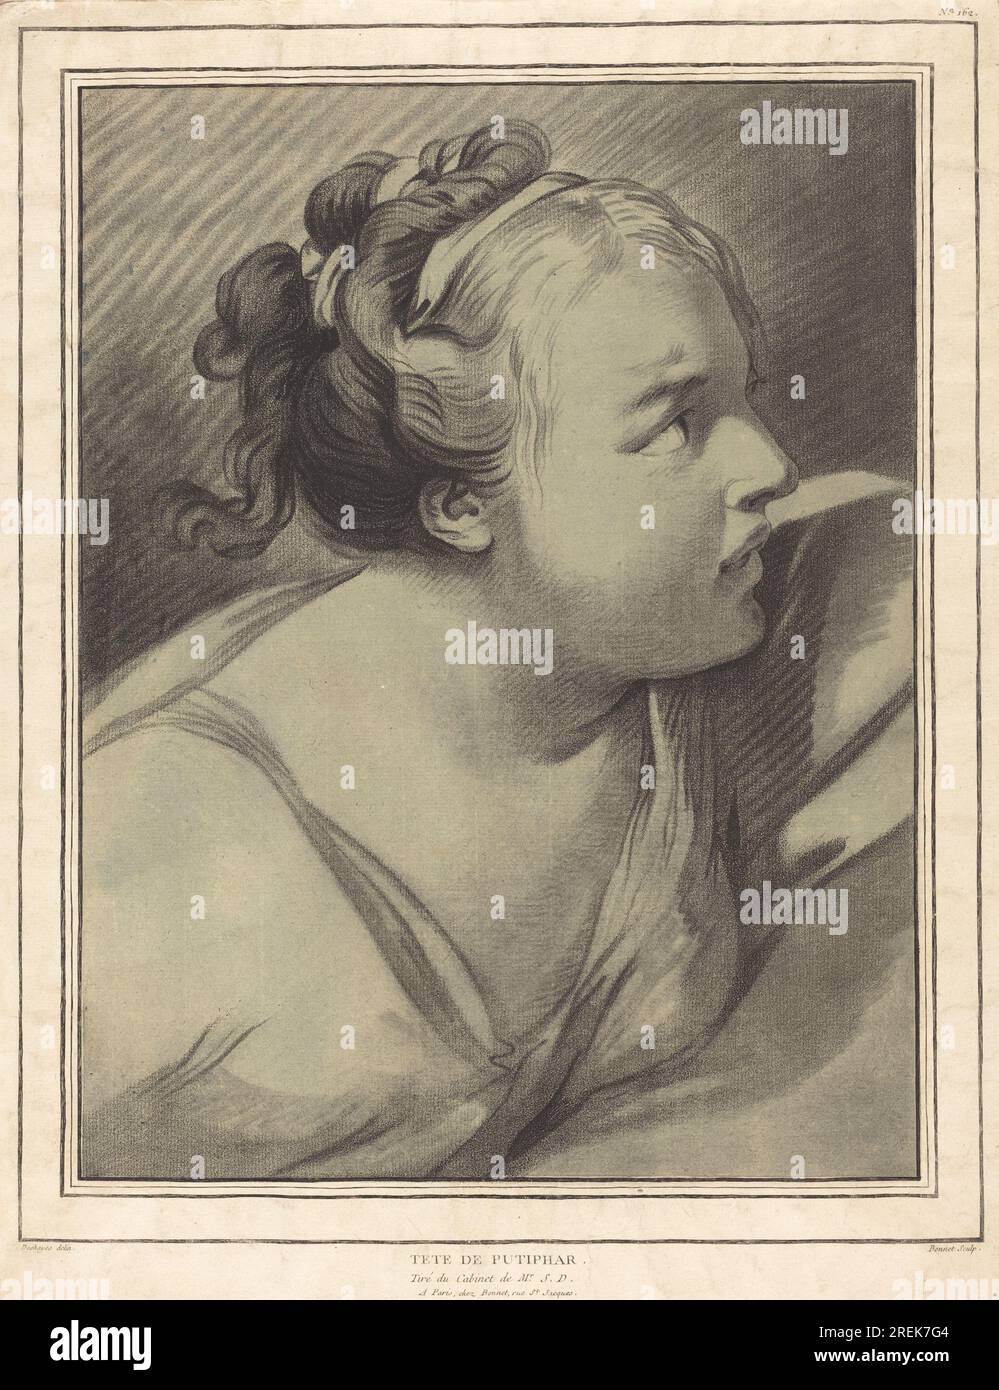 'Louis-Marin Bonnet, after Jean-Baptiste Deshays, Tête de Putiphar (Potiphar's Wife), 1770/1780, crayon-manner engraving in black on blue laid paper; laid down to engraved sheet, sheet: 42.2 x 32.5 cm (16 5/8 x 12 13/16 in.) support: 53.1 x 39.3 cm (20 7/8 x 15 1/2 in.), Ailsa Mellon Bruce Fund, 1992.22.3' Stock Photo